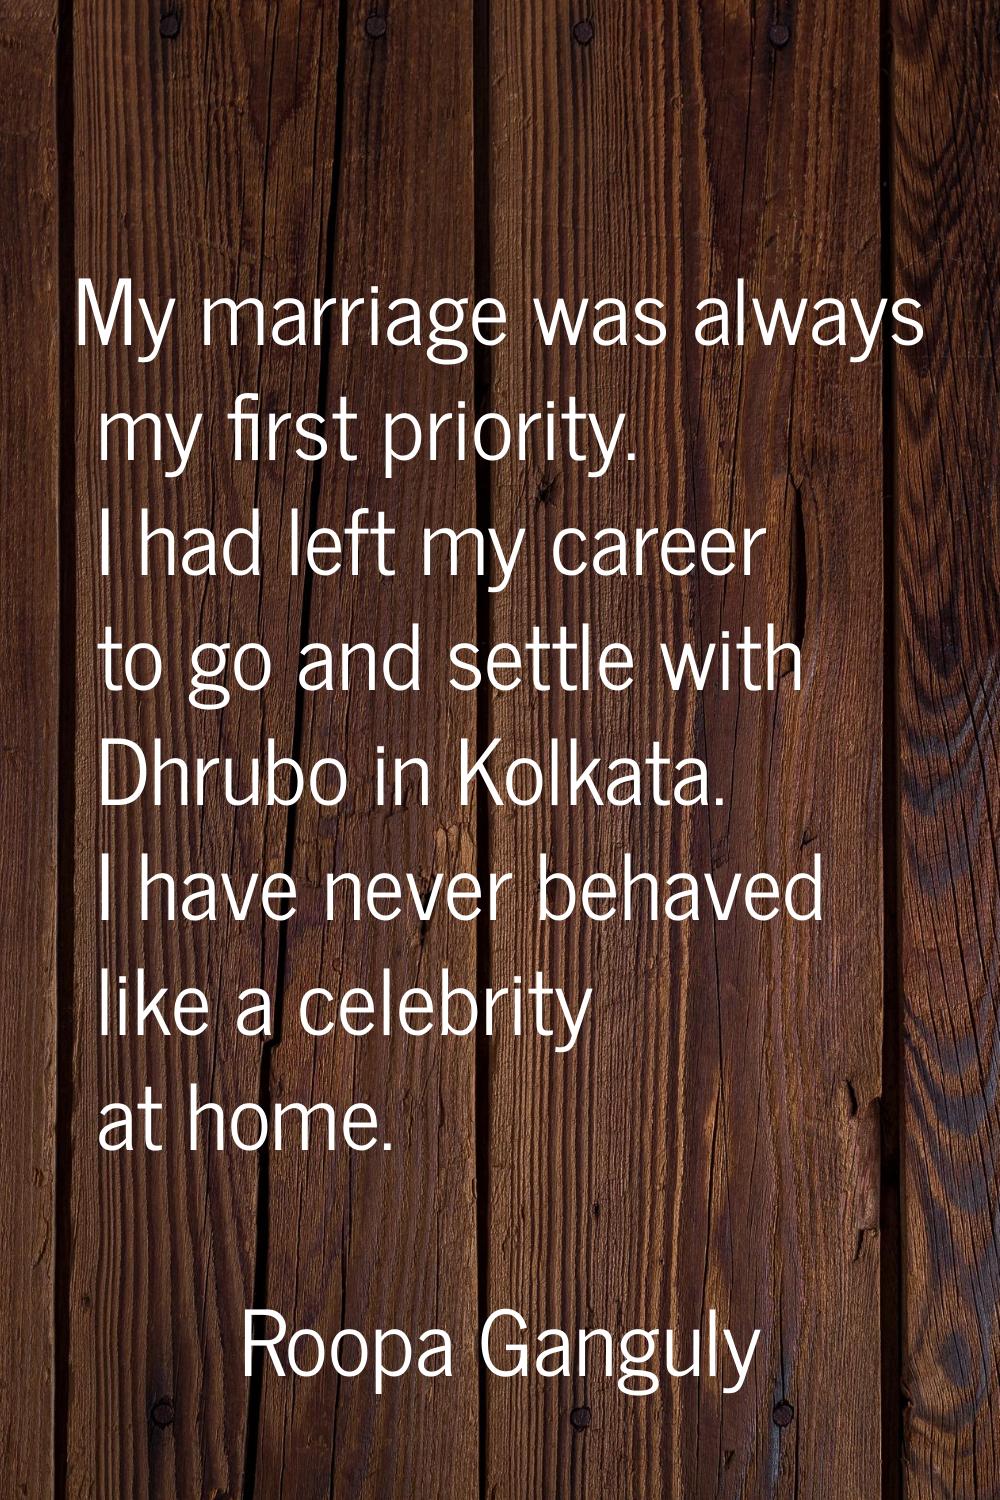 My marriage was always my first priority. I had left my career to go and settle with Dhrubo in Kolk